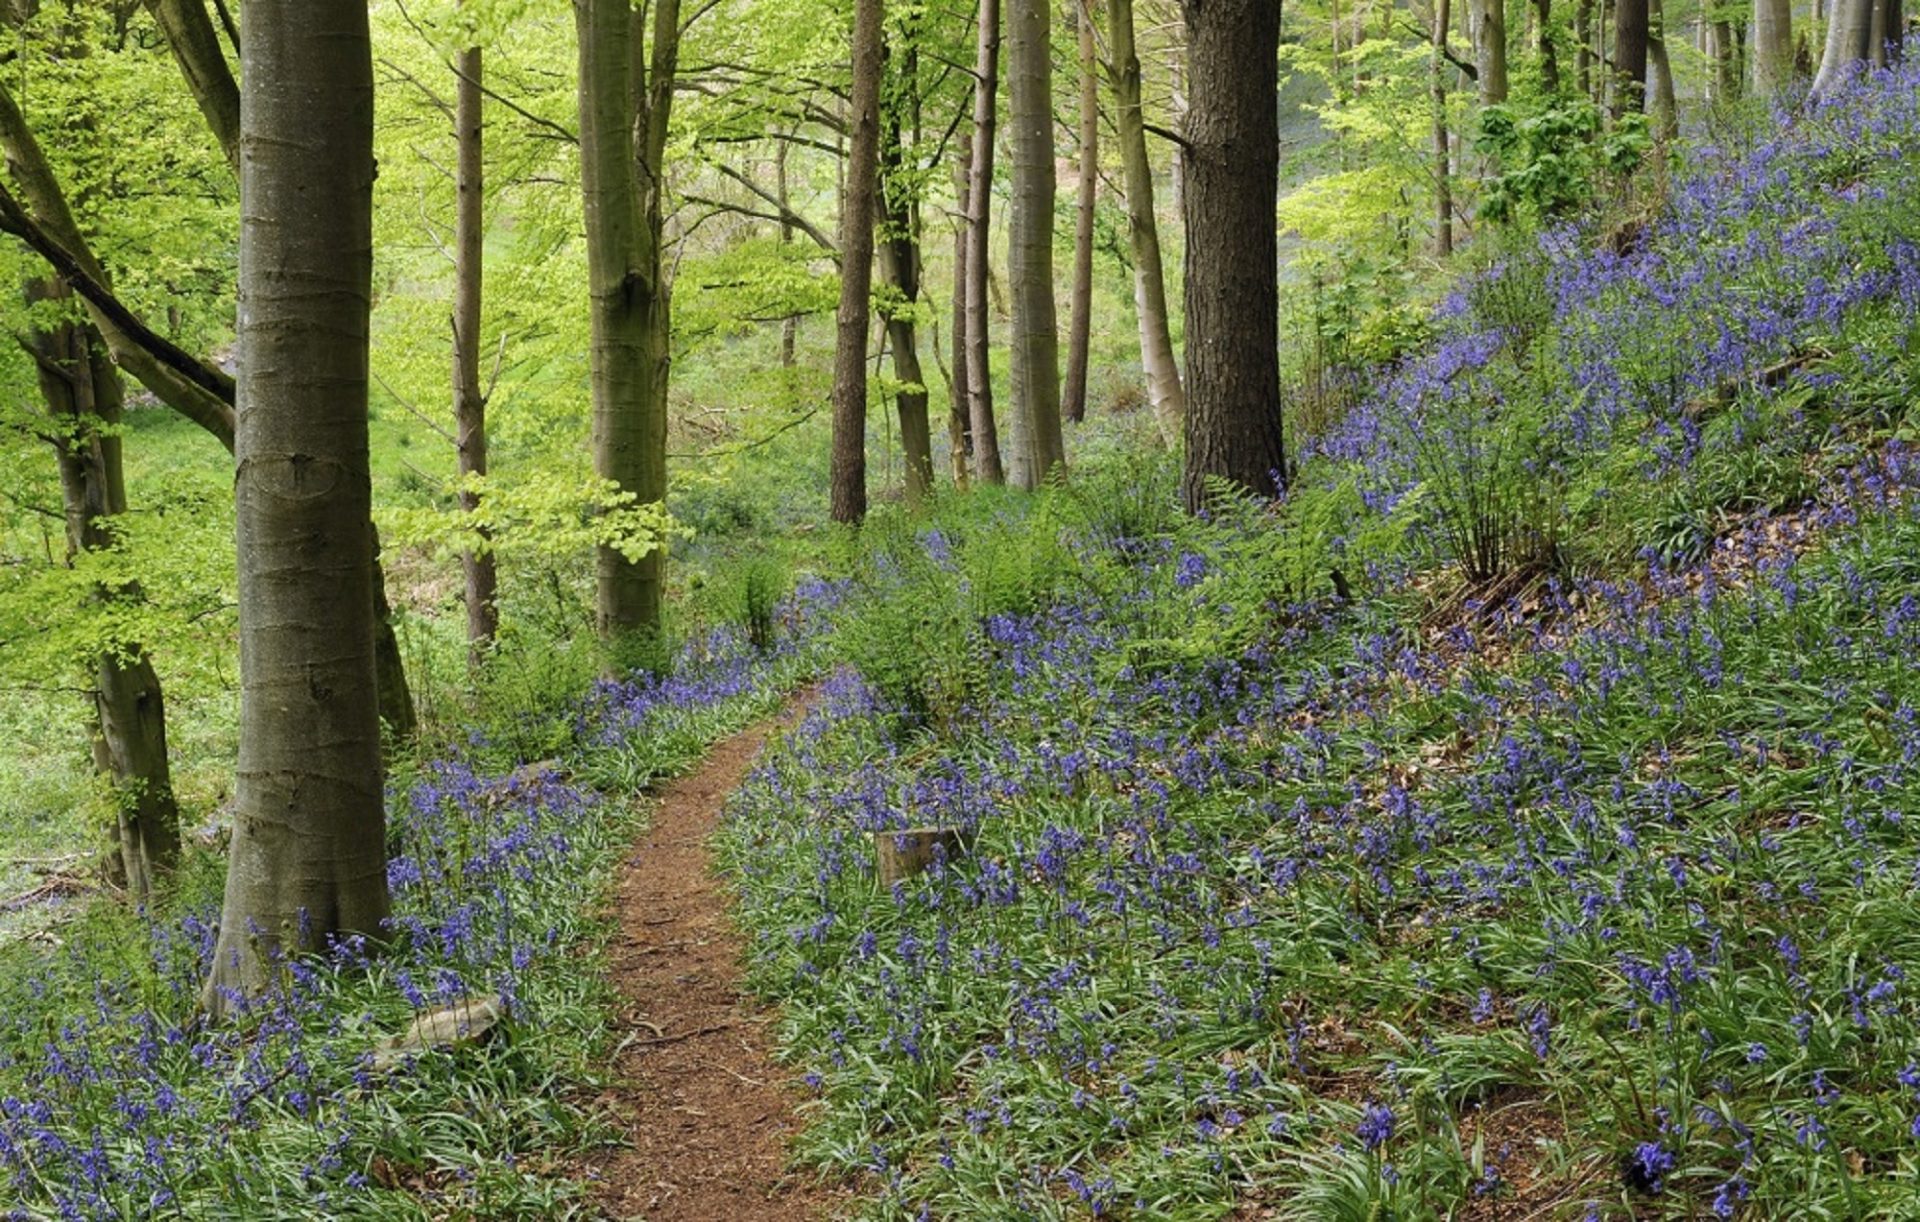 Kirkbride Hall private bluebell woods walks in the grounds of Melmerby Hall and Kirkbride Hall at The Rowley Estates in Melmerby